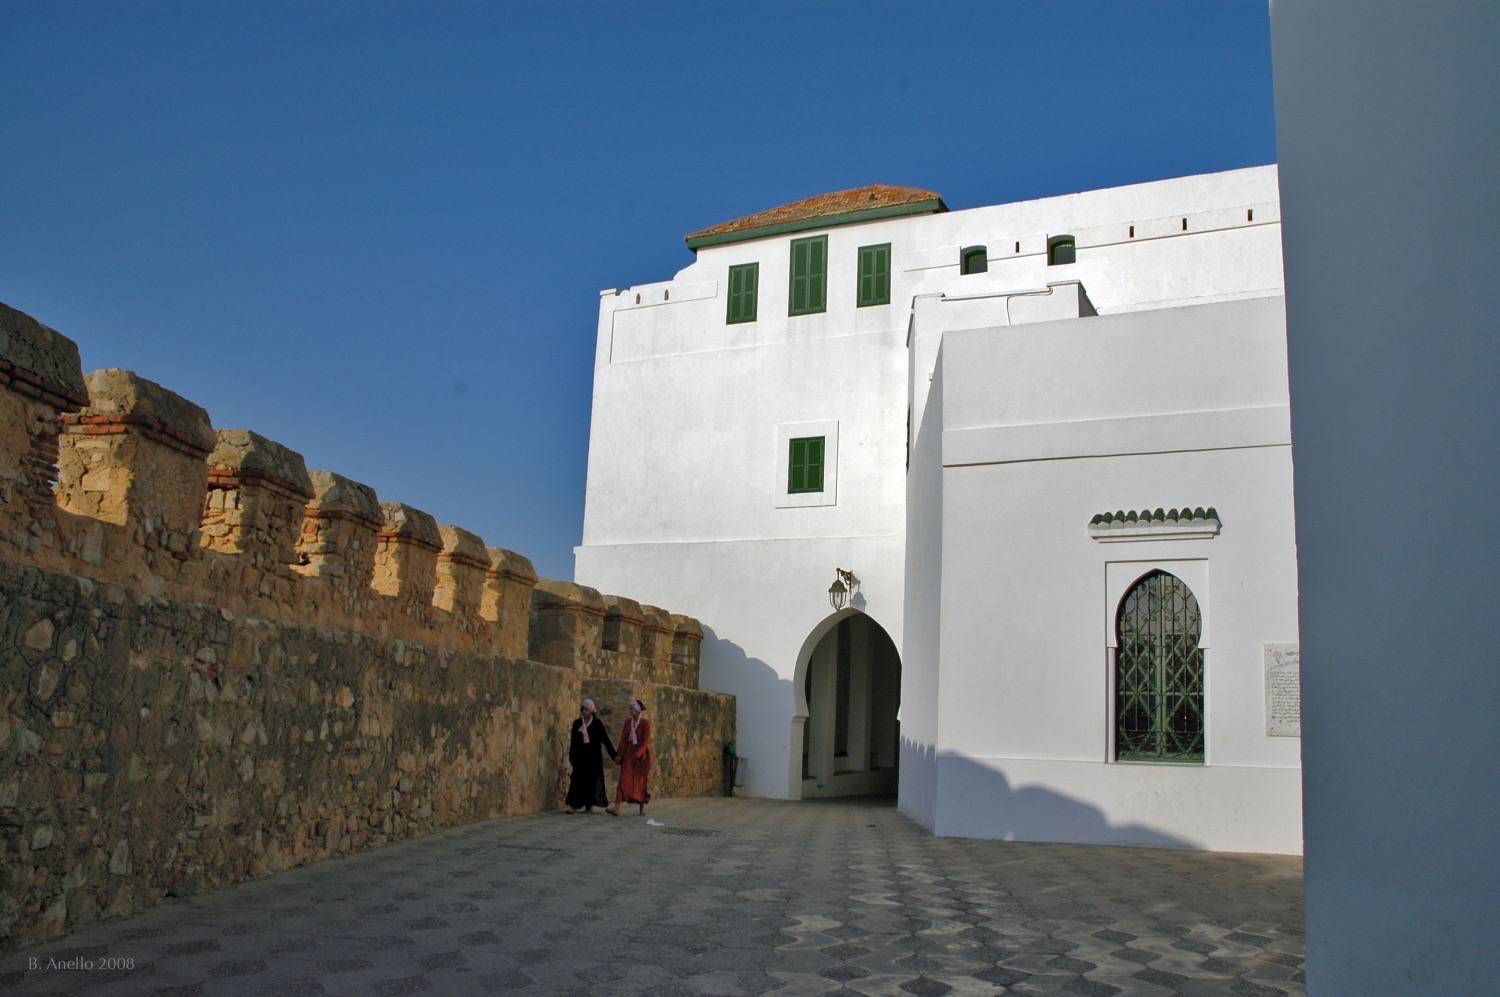 A medina building intersecting with the city wall